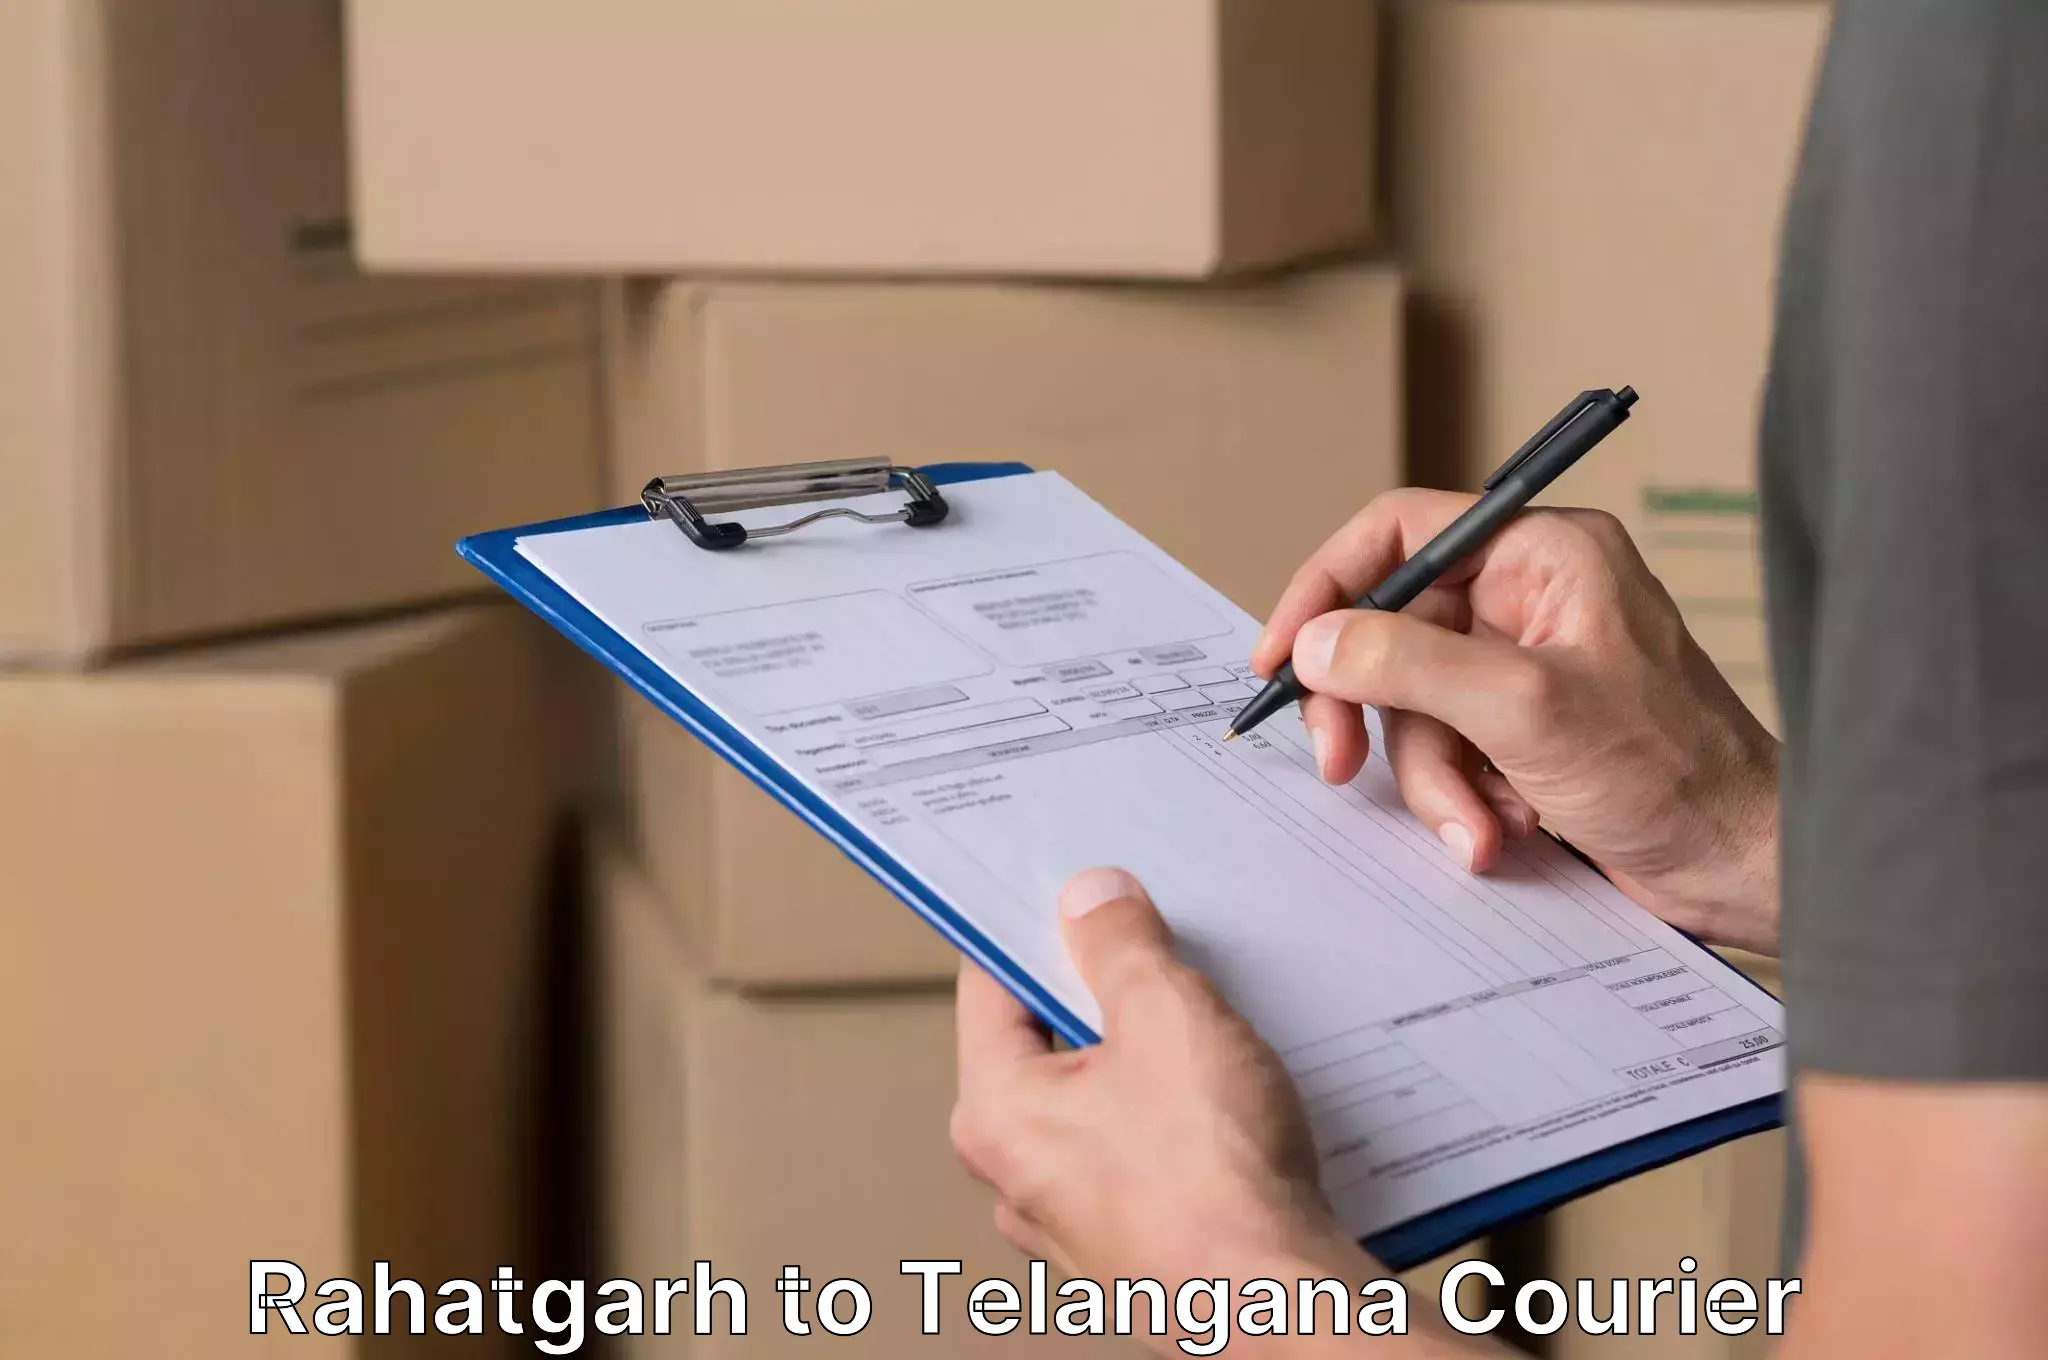 Reliable relocation services in Rahatgarh to Manuguru